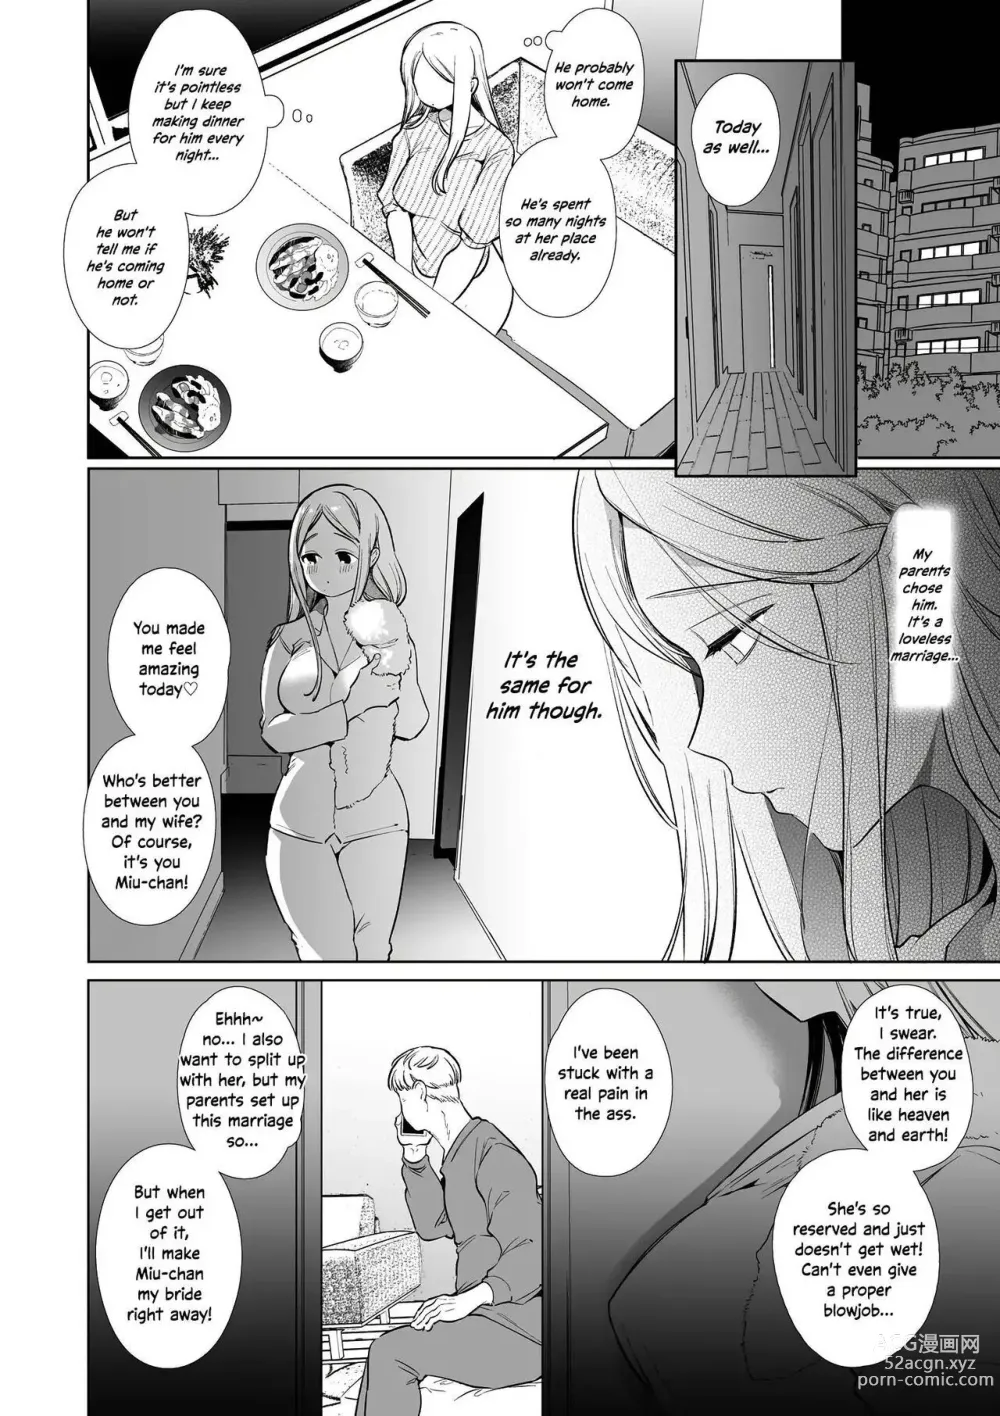 Page 5 of doujinshi Kana-san NTR ~ Degradation of a Housewife by a Guy in an Alter Account ~ (decensored)